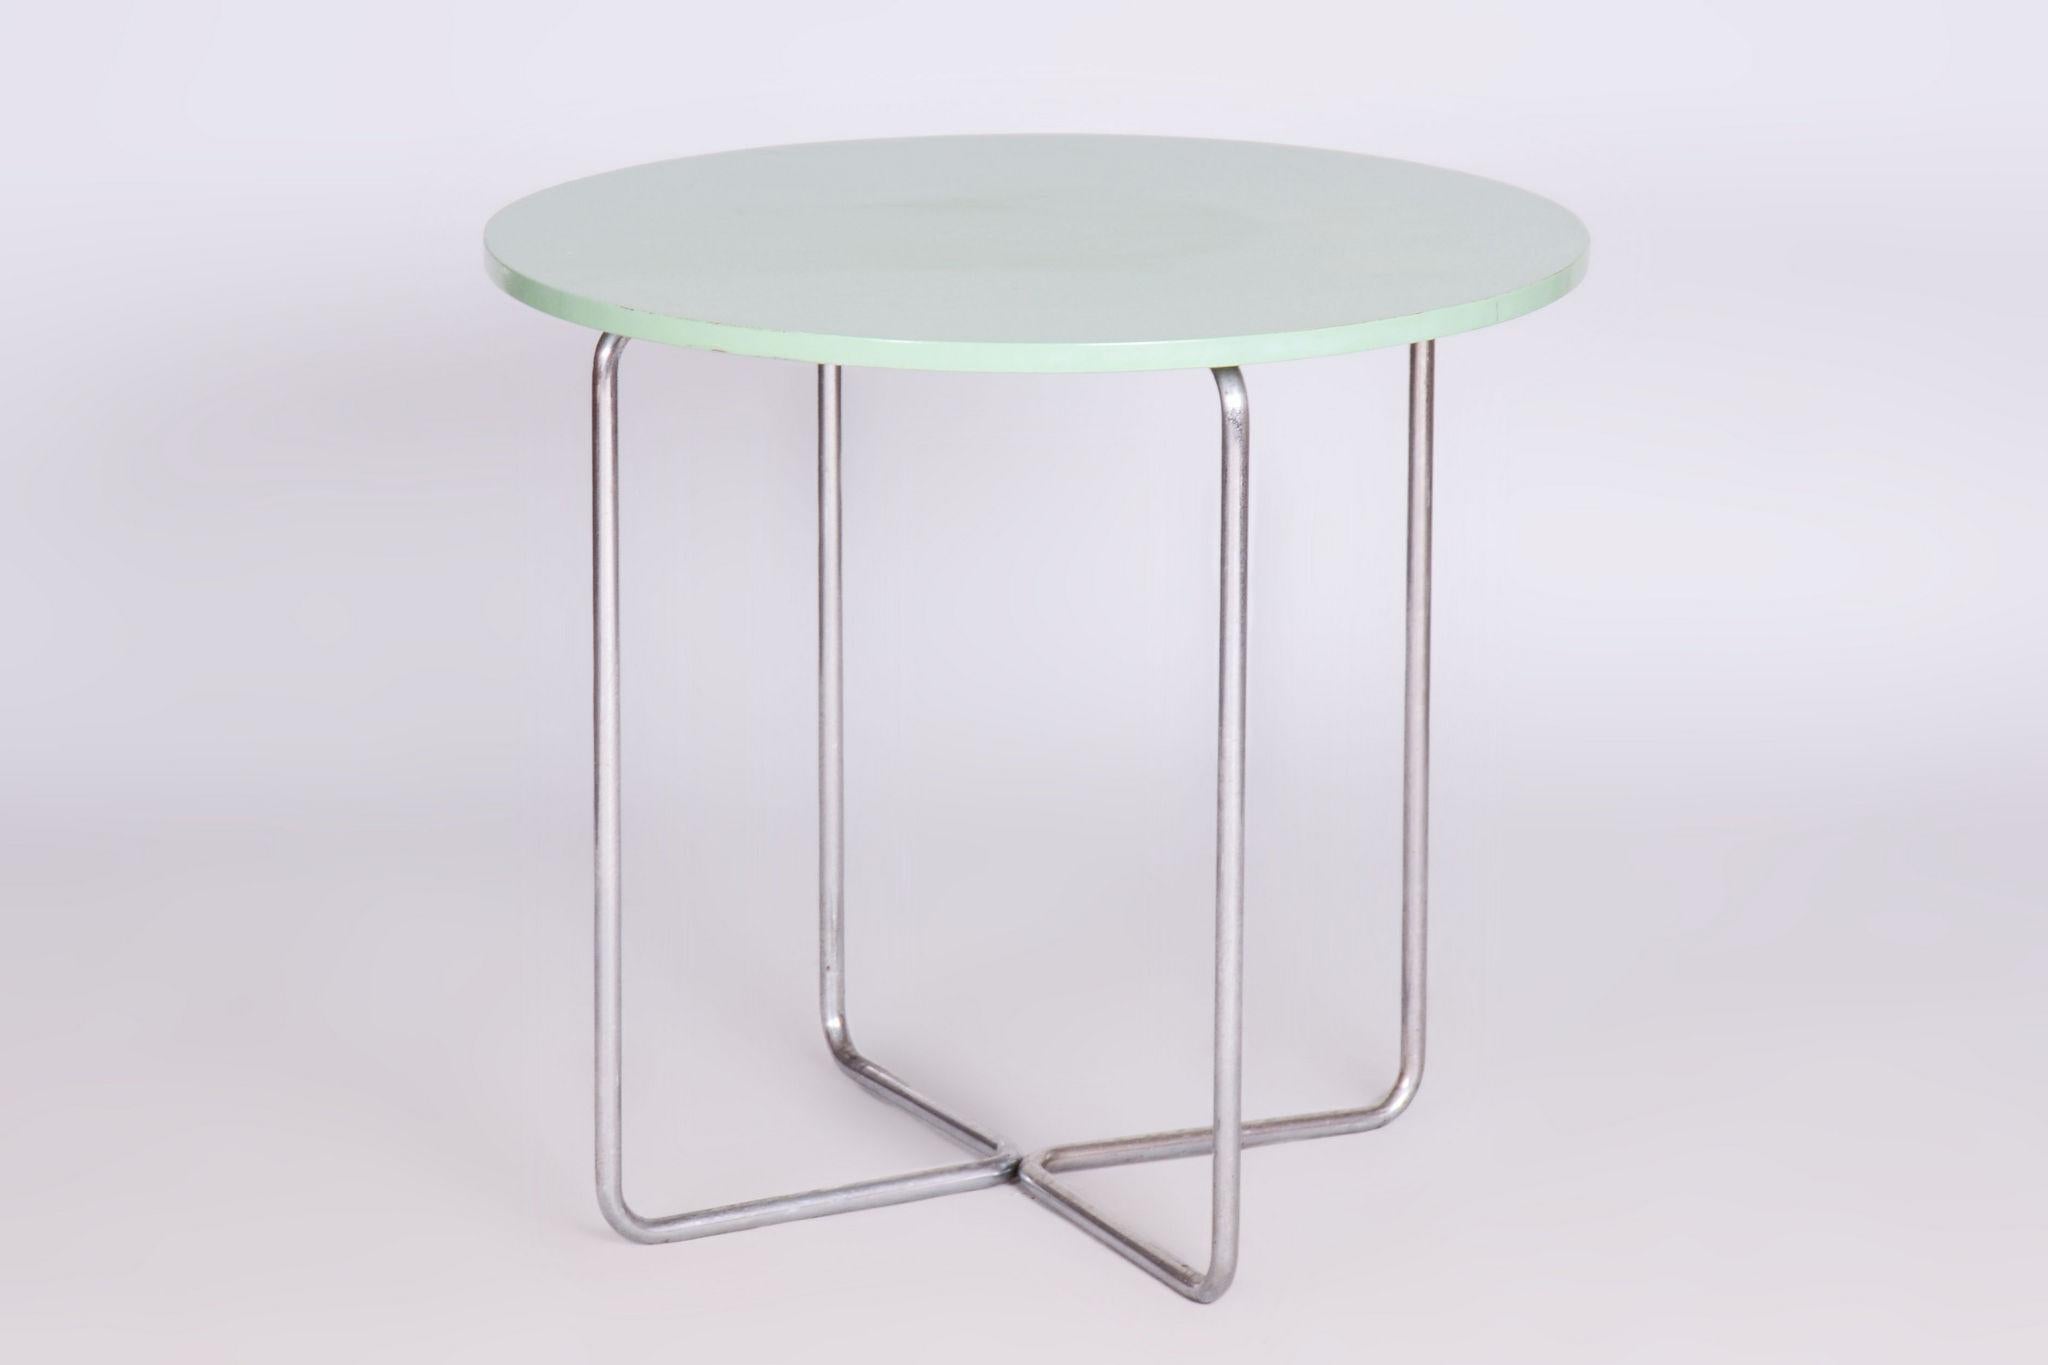 Restored Bauhaus Round Table, Chrome, Revived Polish, Czechia, 1930s For Sale 3